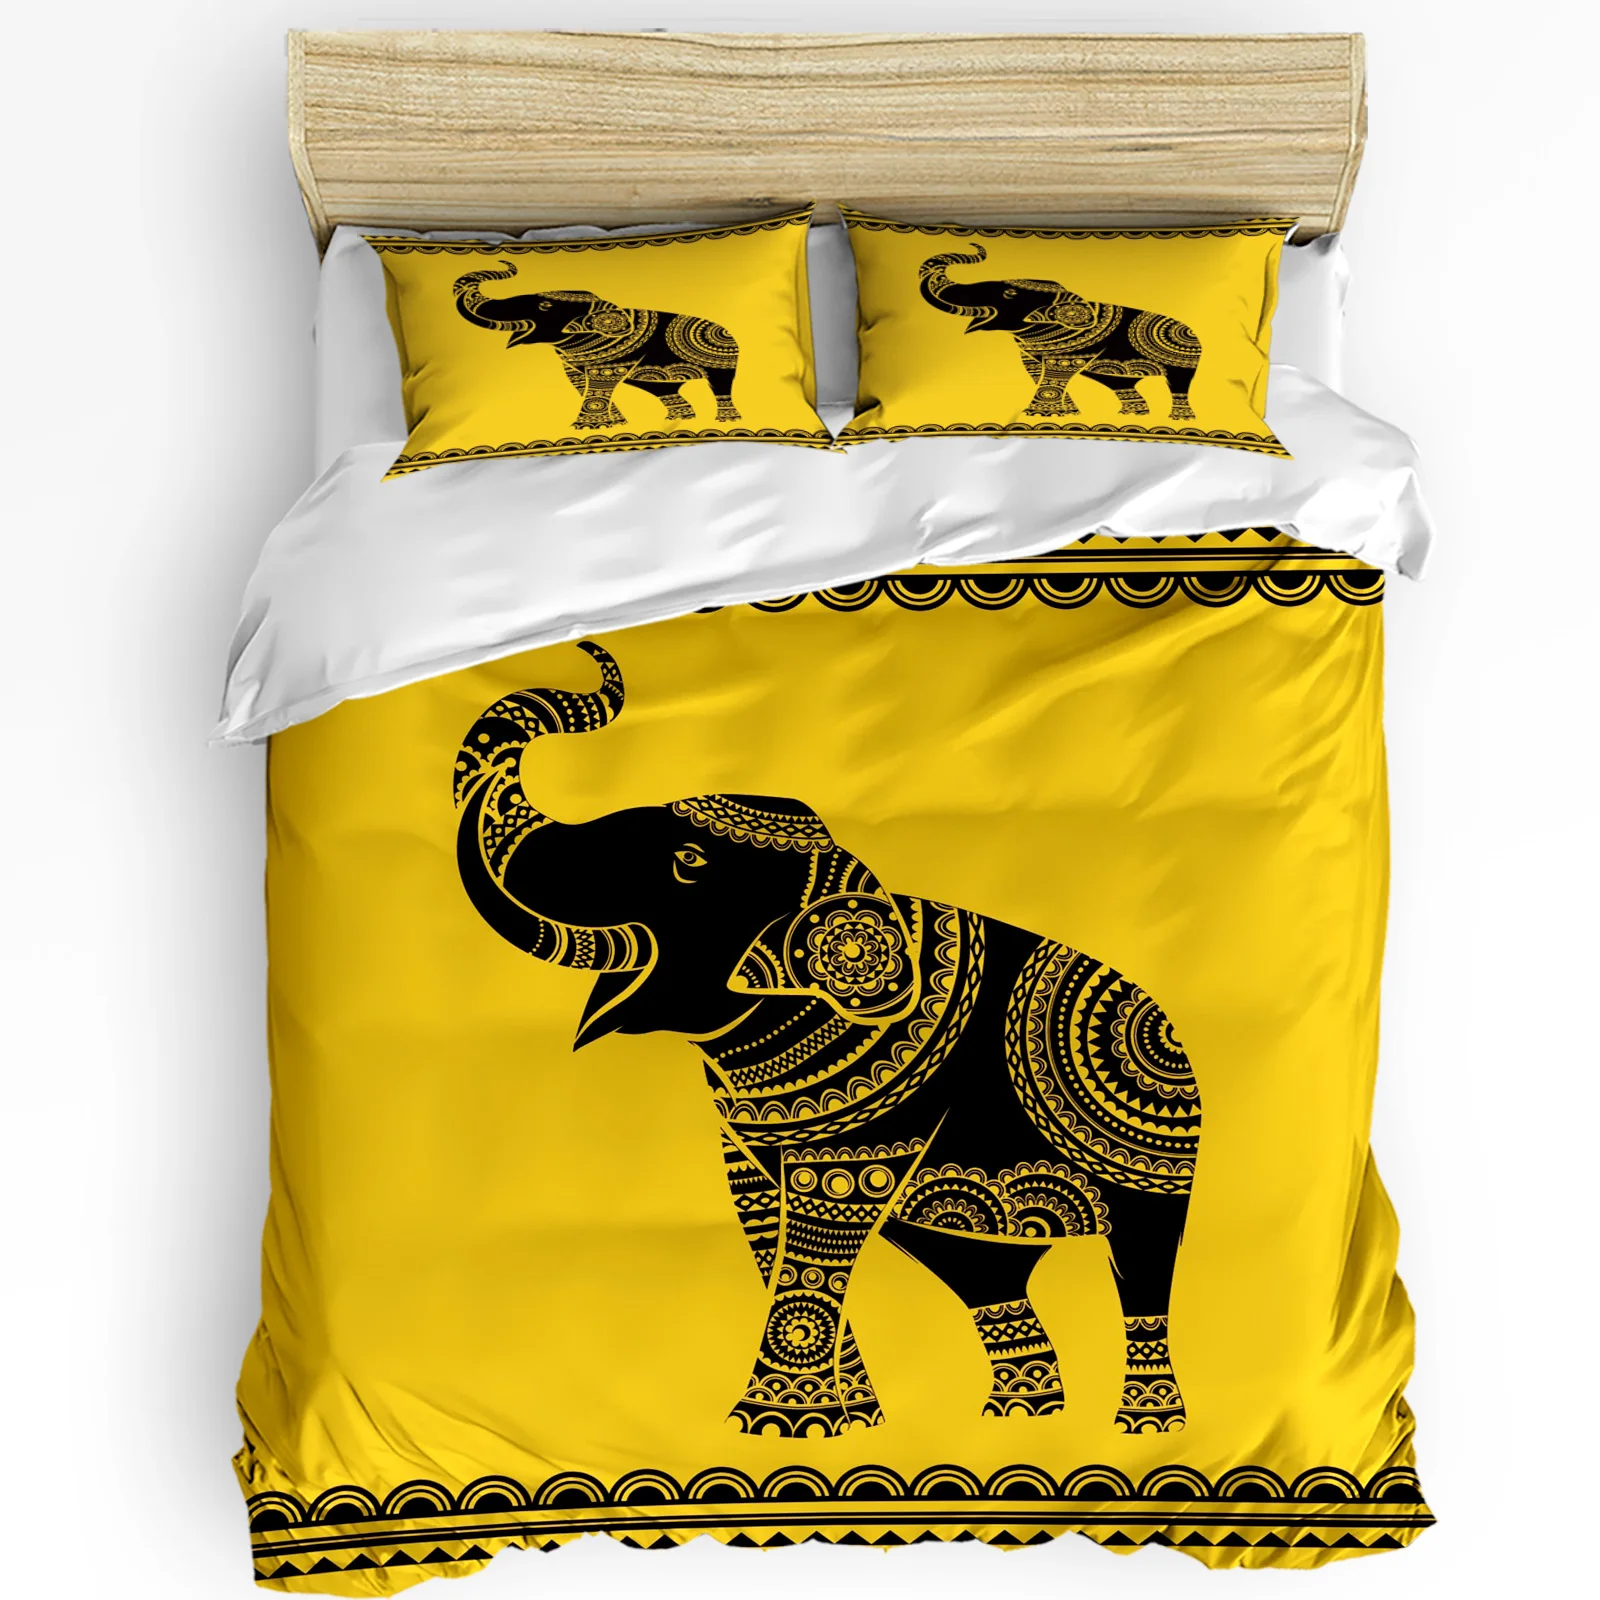 

Elephant Art Indian Bobo Style 3pcs Bedding Set For Bedroom Double Bed Home Textile Duvet Cover Quilt Cover Pillowcase